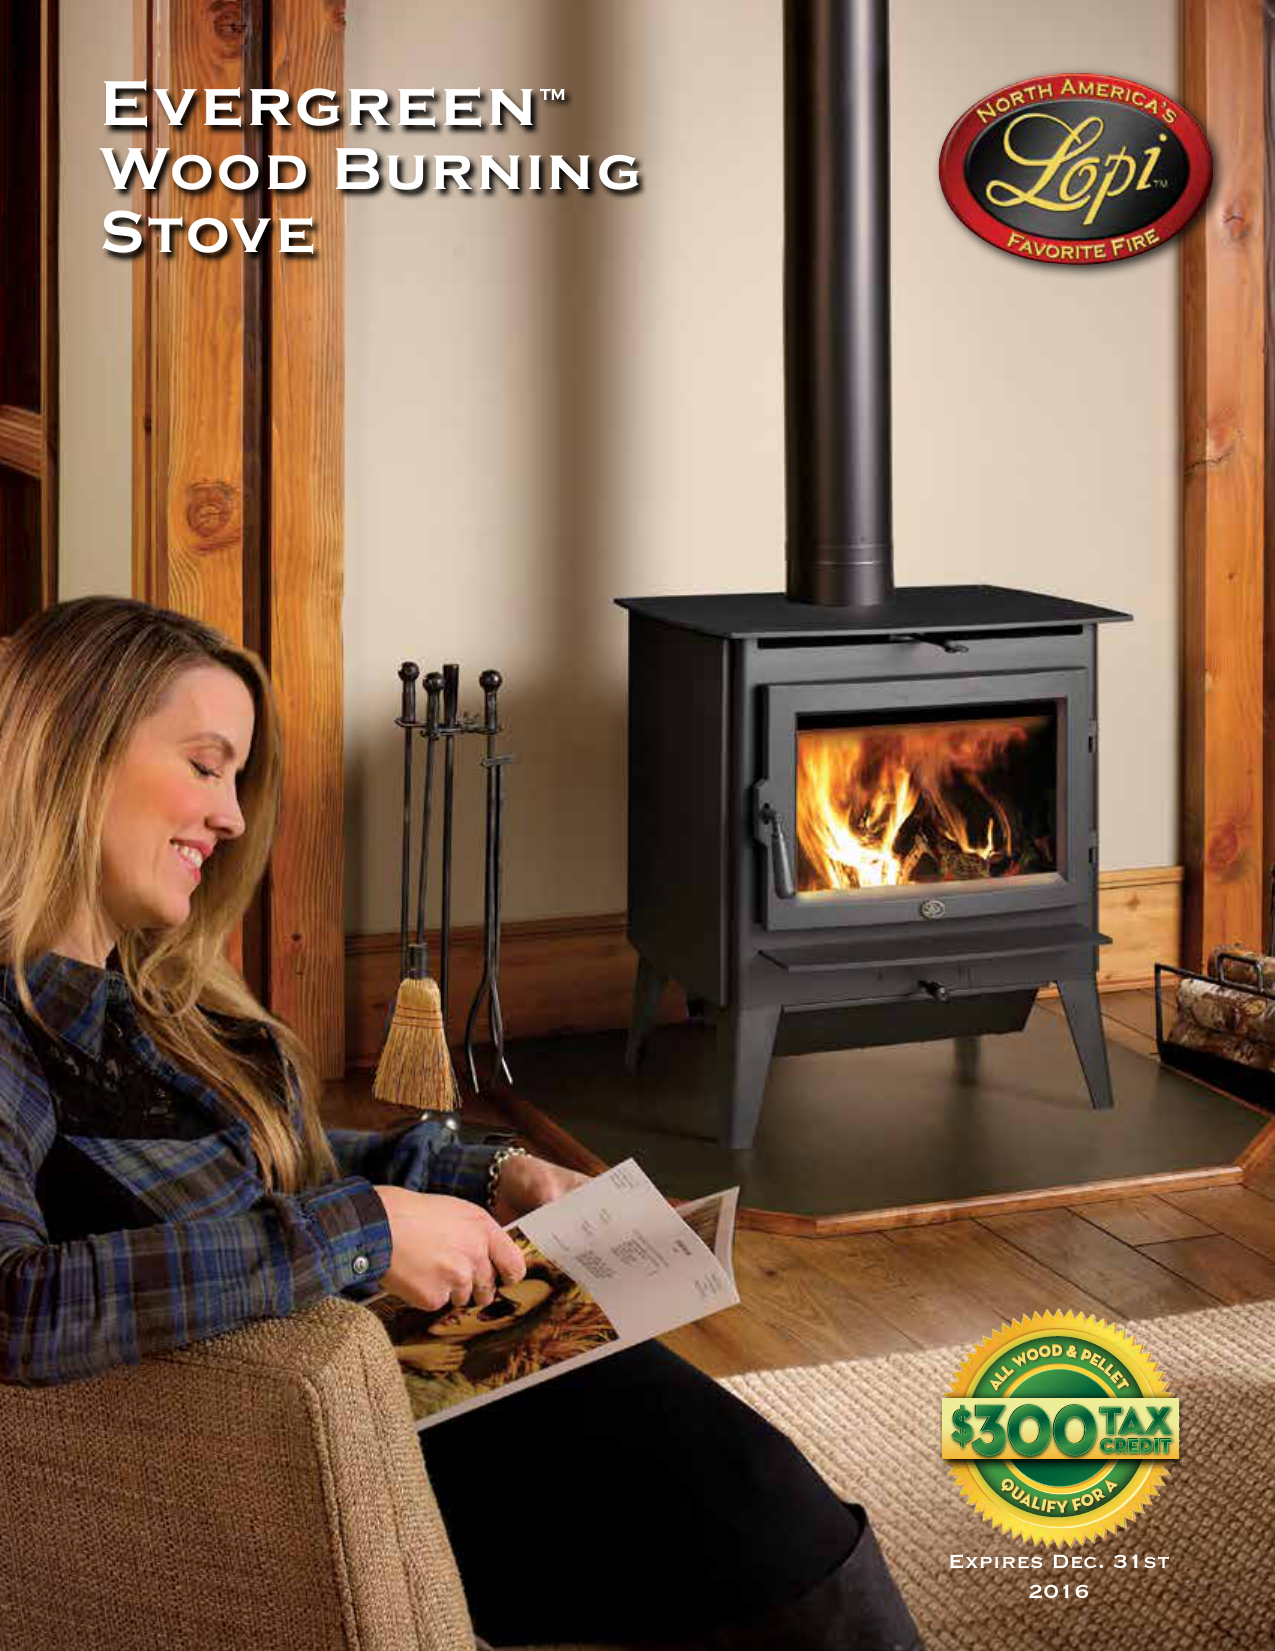 Fireboxes for Wood Burning Fireplaces Awesome Evergreen Lopi Stoves